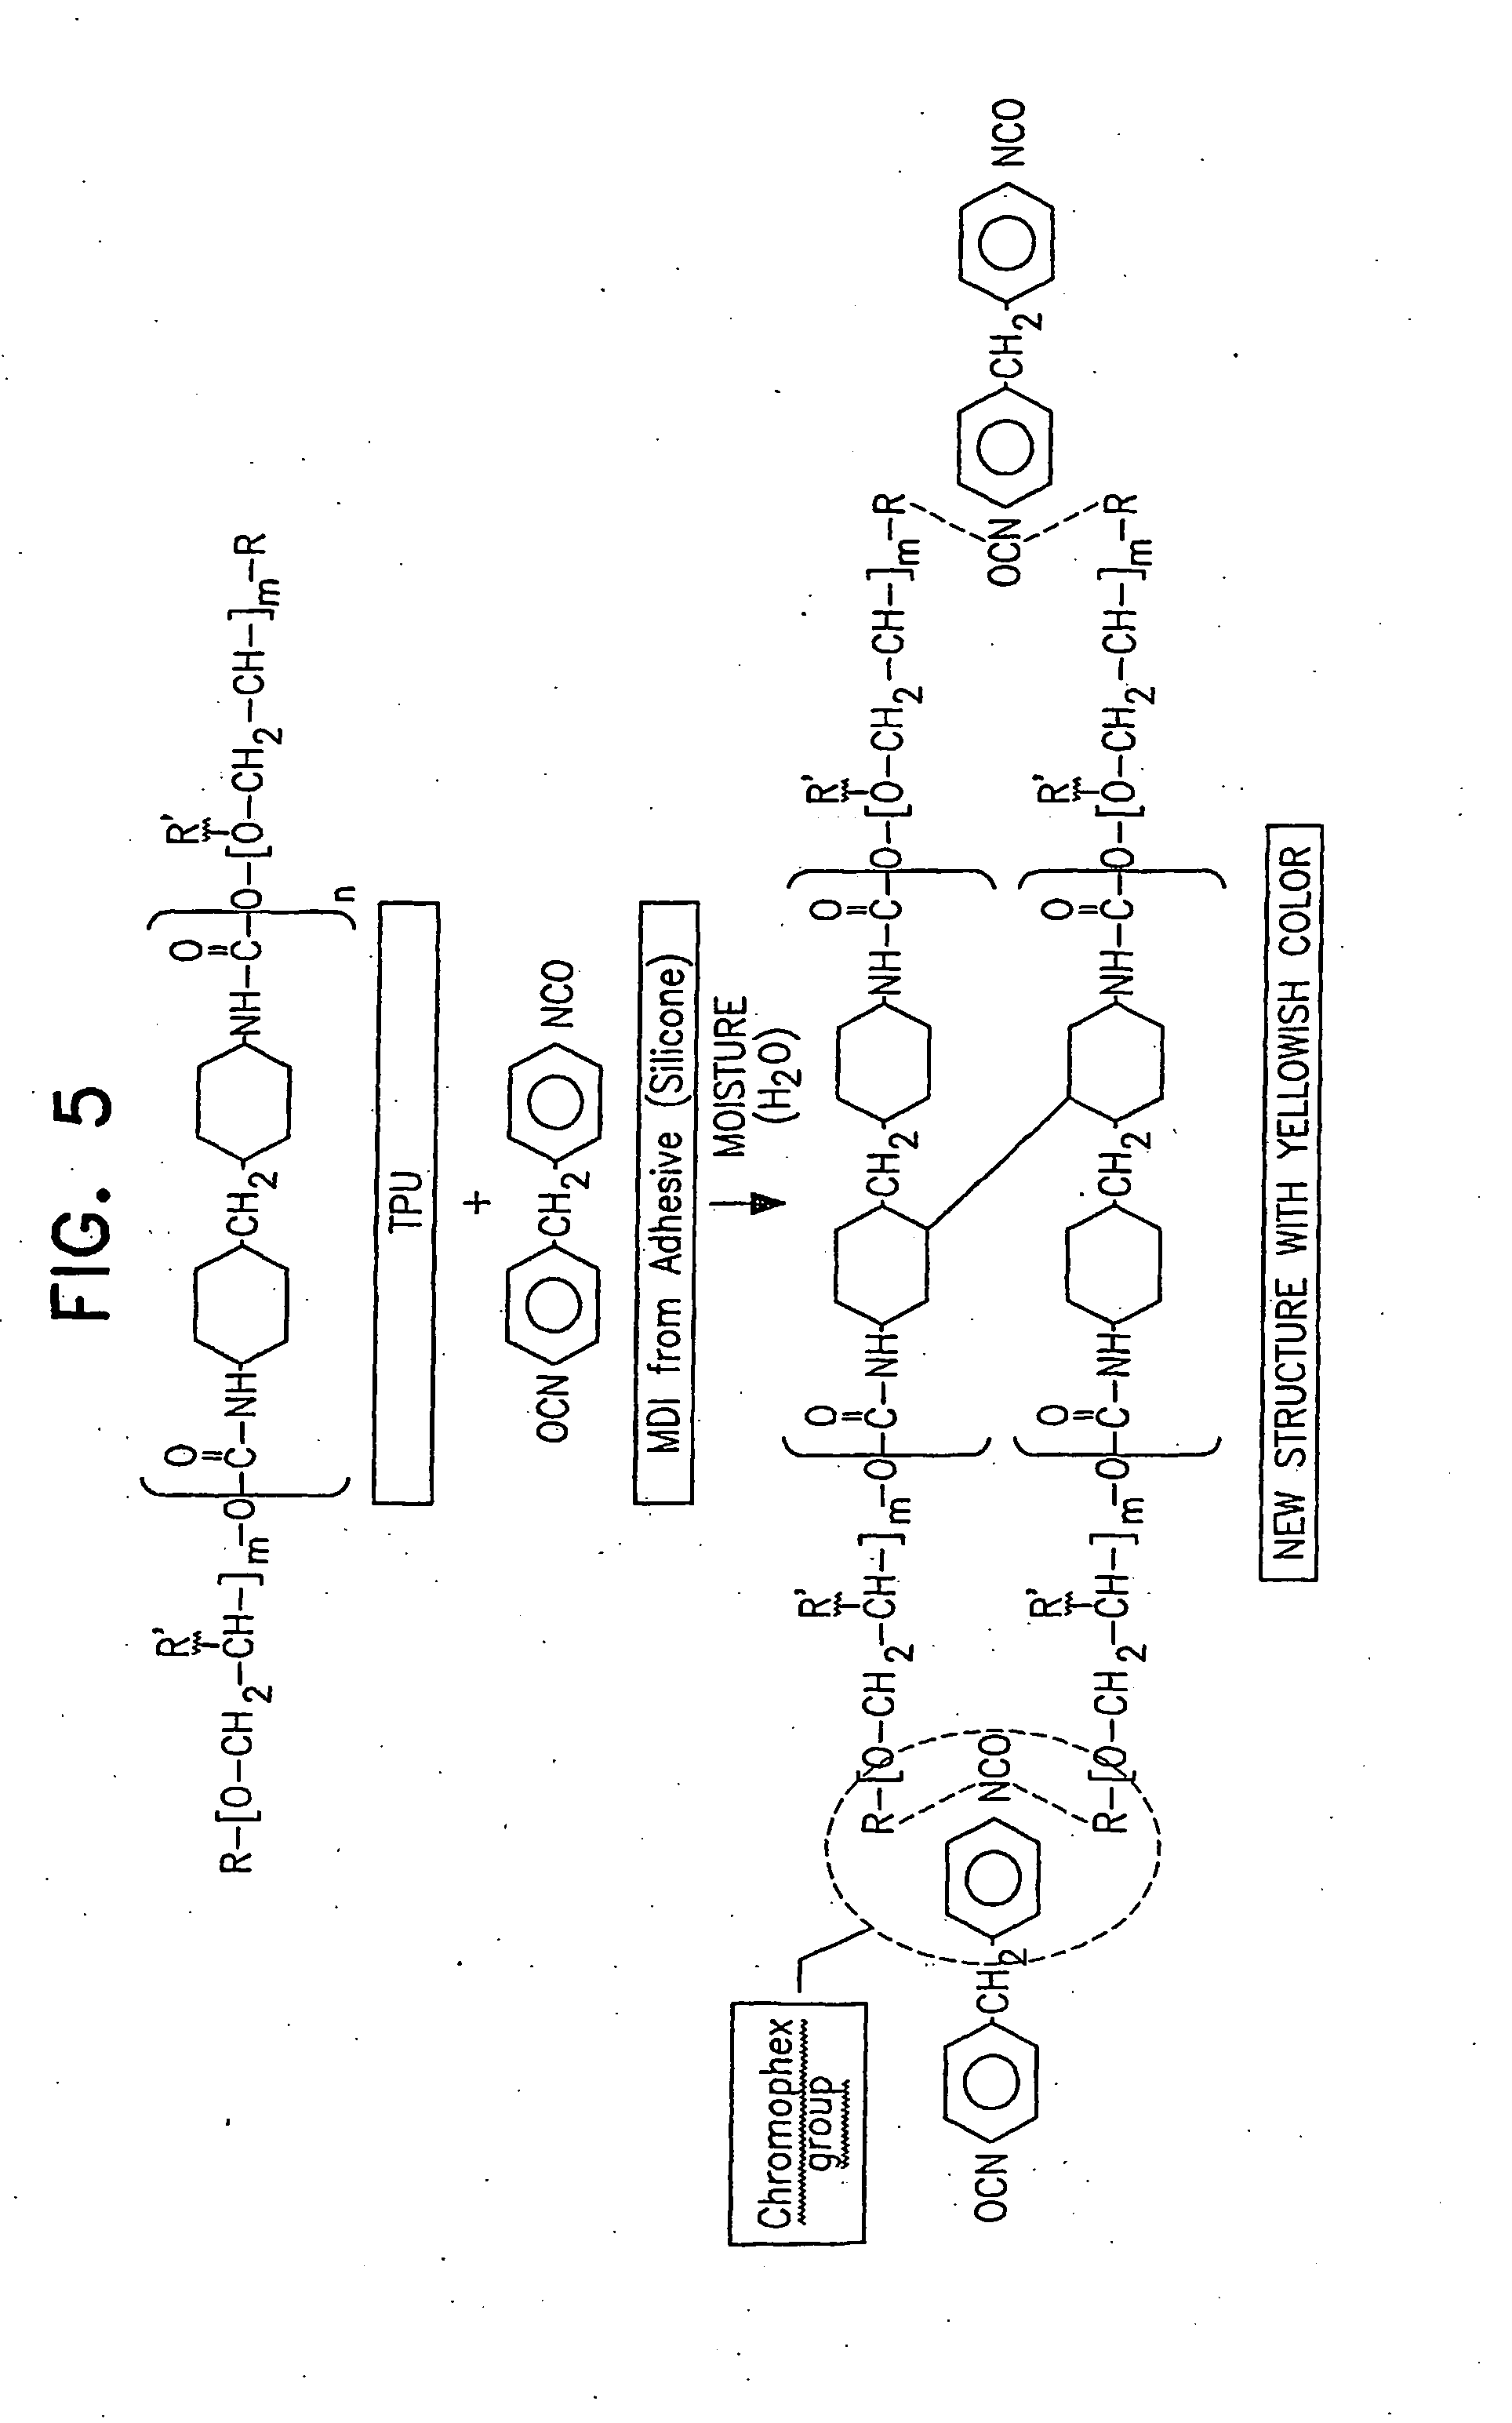 Pet as edge seal for multilaminated compositions